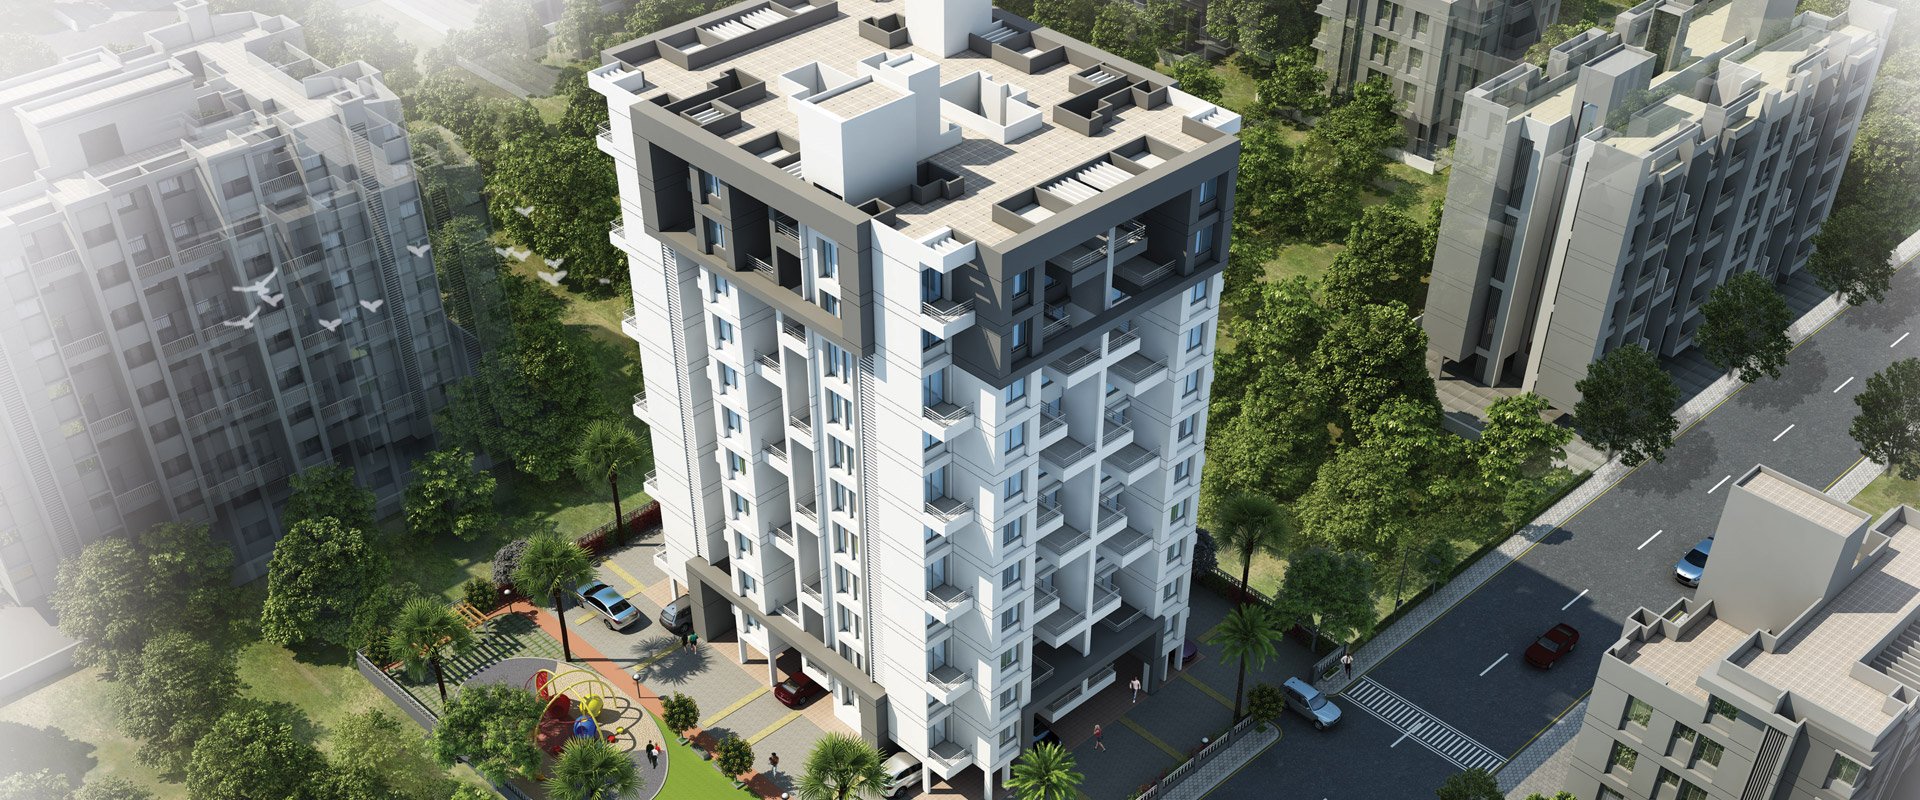 2 BHK flats in thergaon